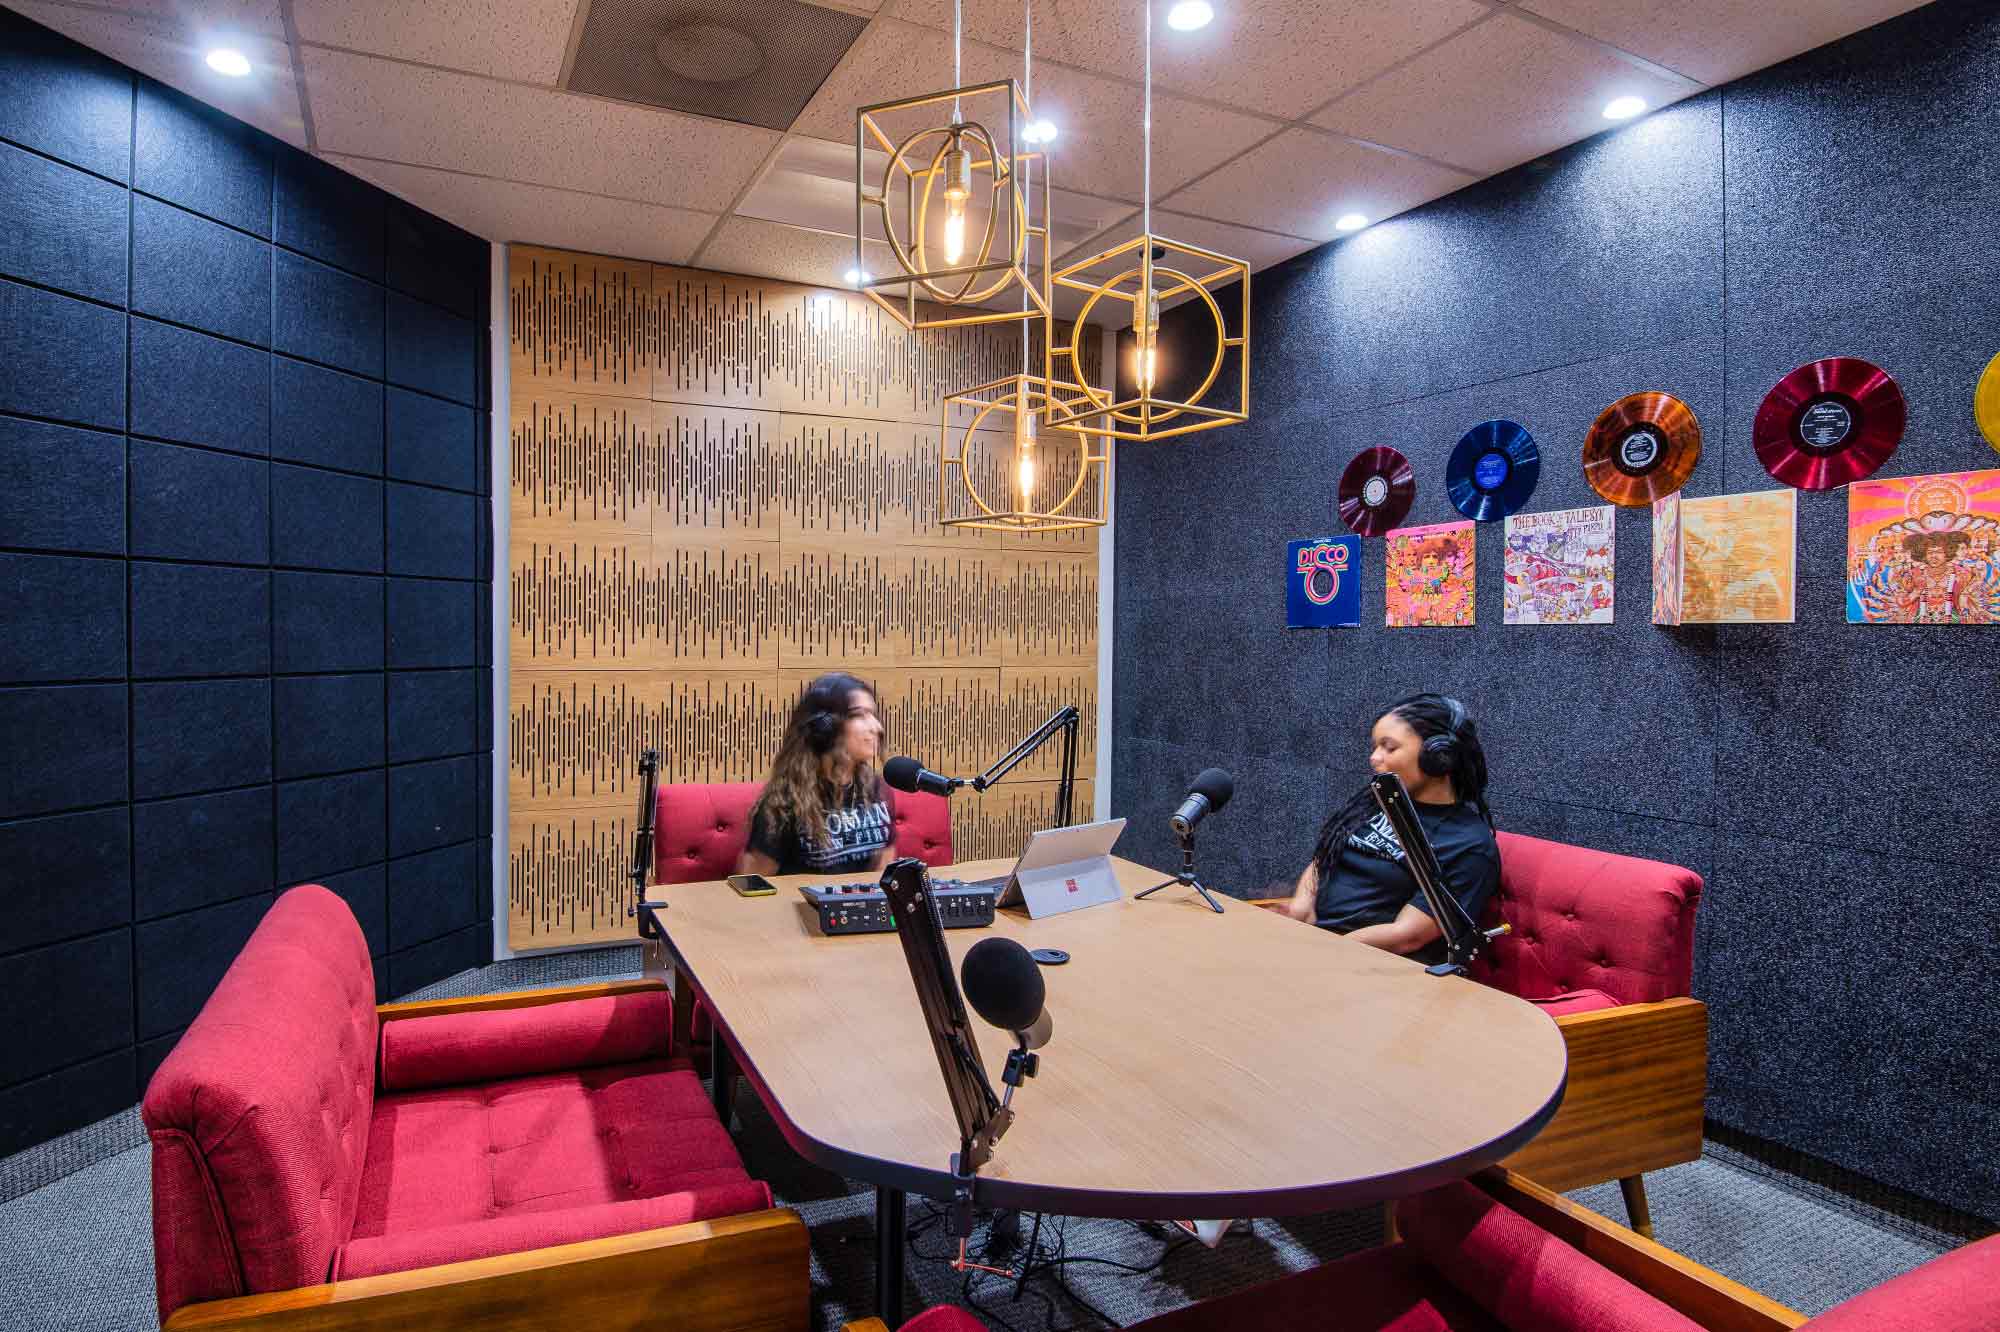 Podcast Room in CUBExec at Uptown Dallas. It has 4 red chairs and 4 mics.